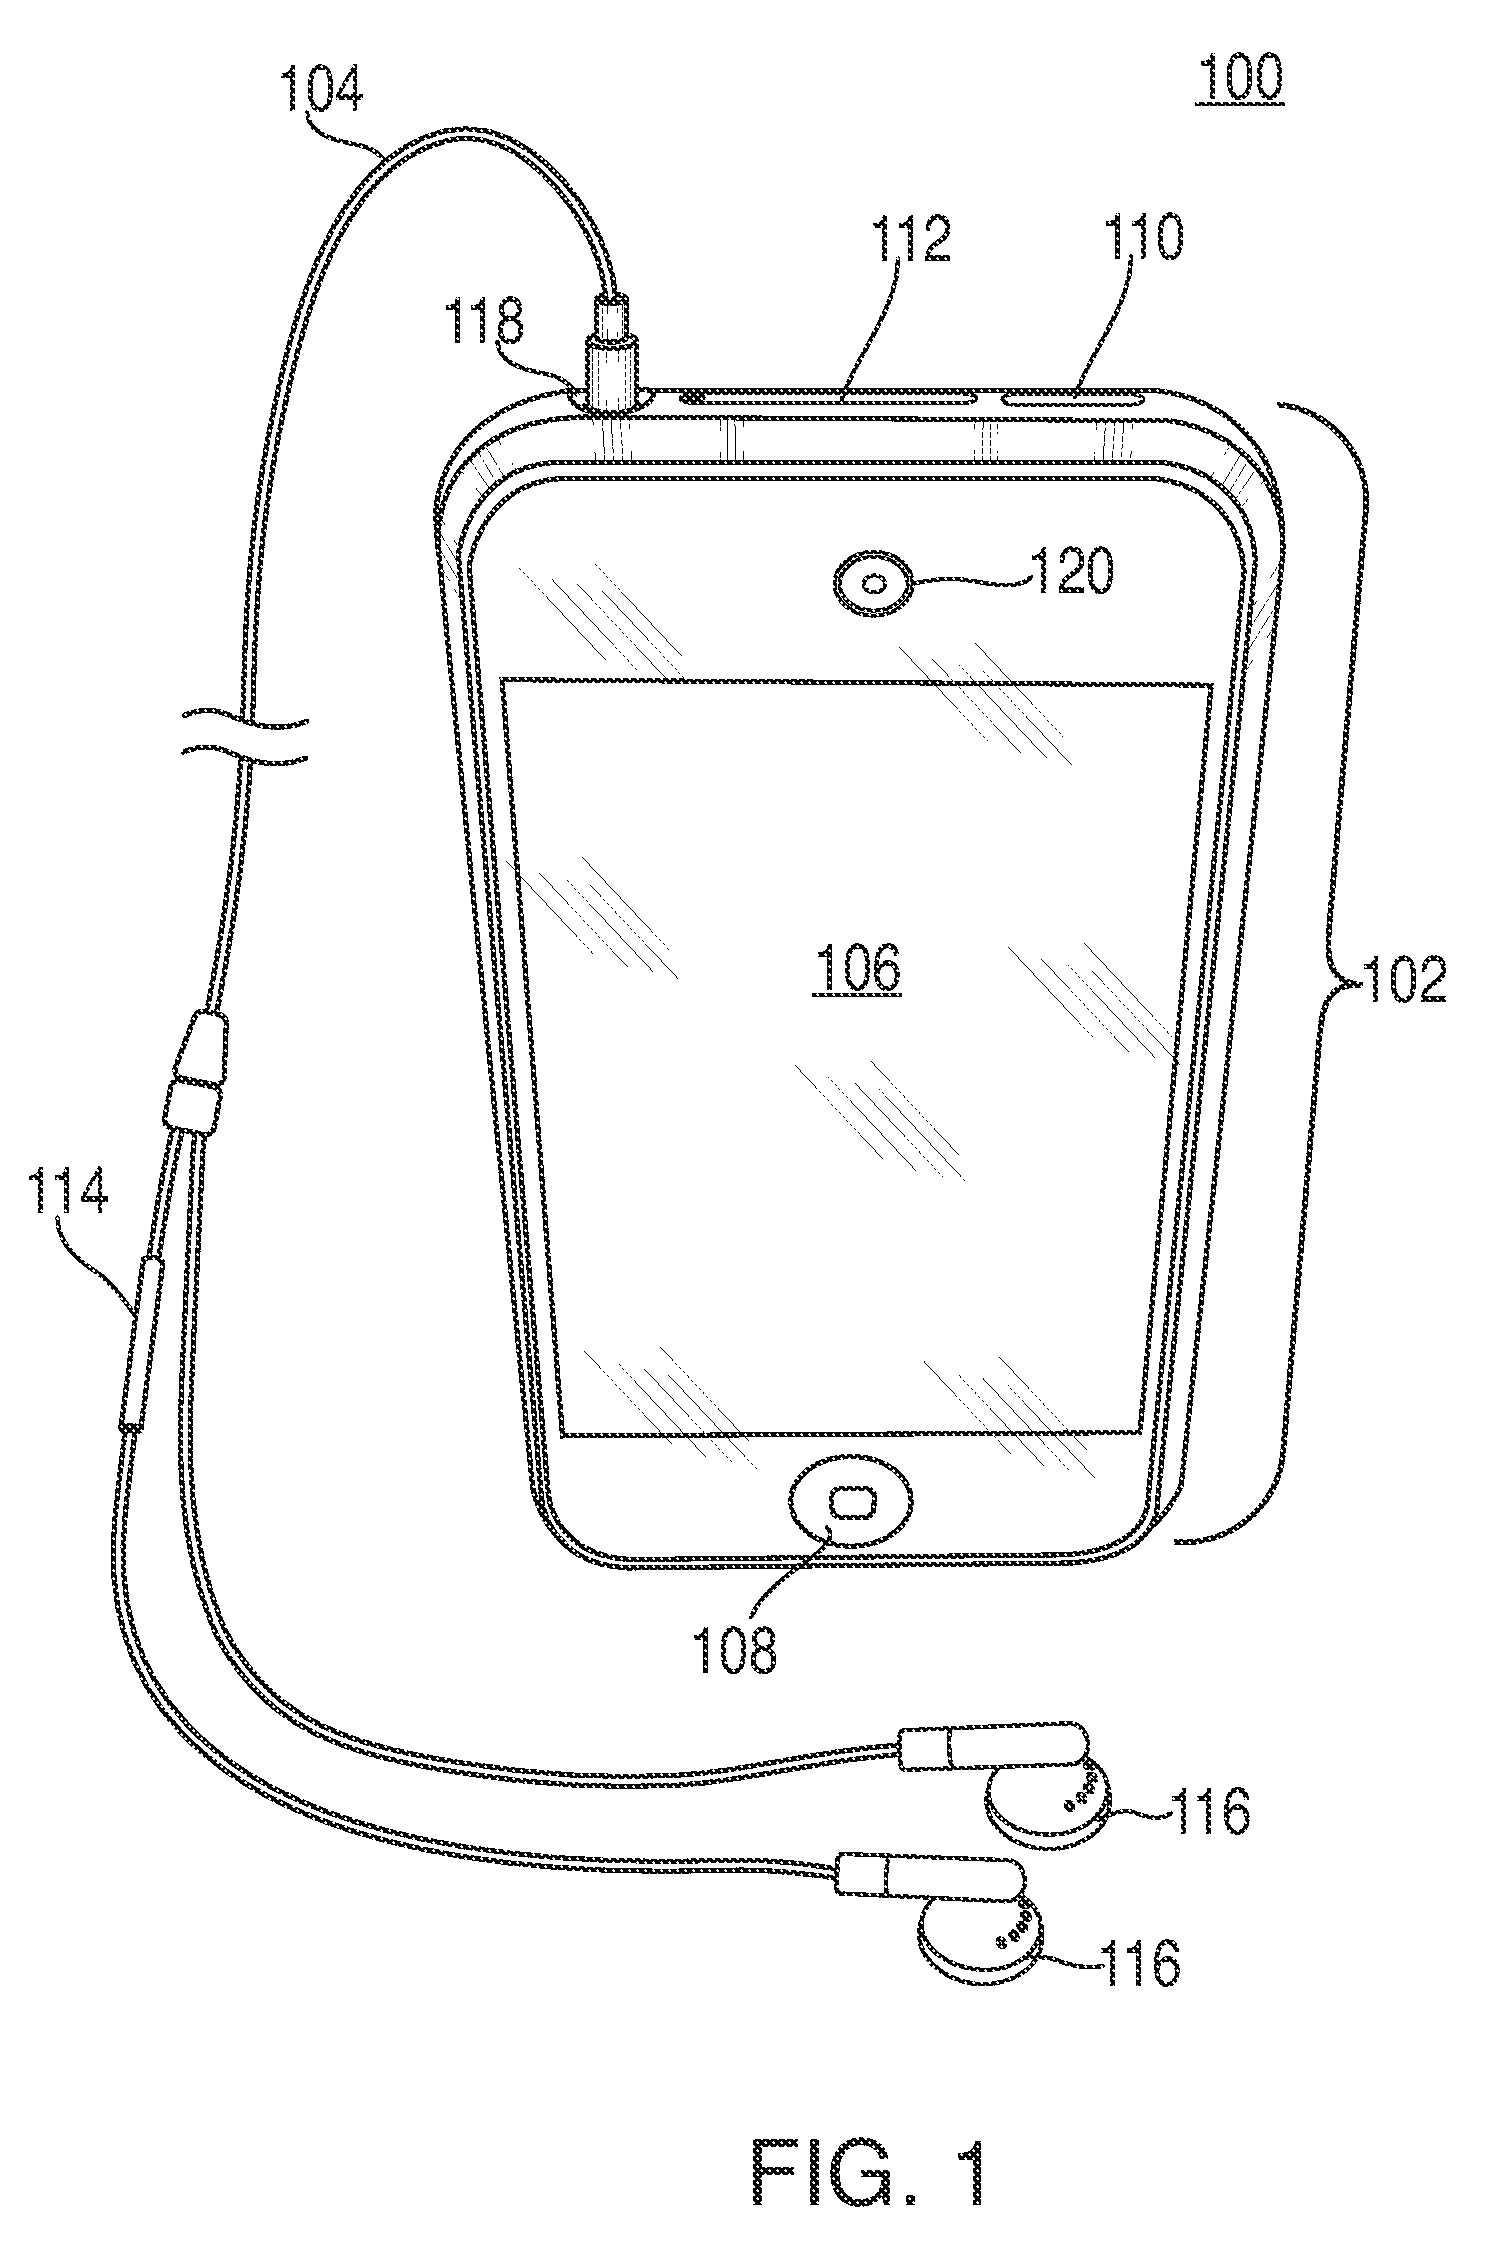 Systems and methods for identifying unauthorized users of an electronic device